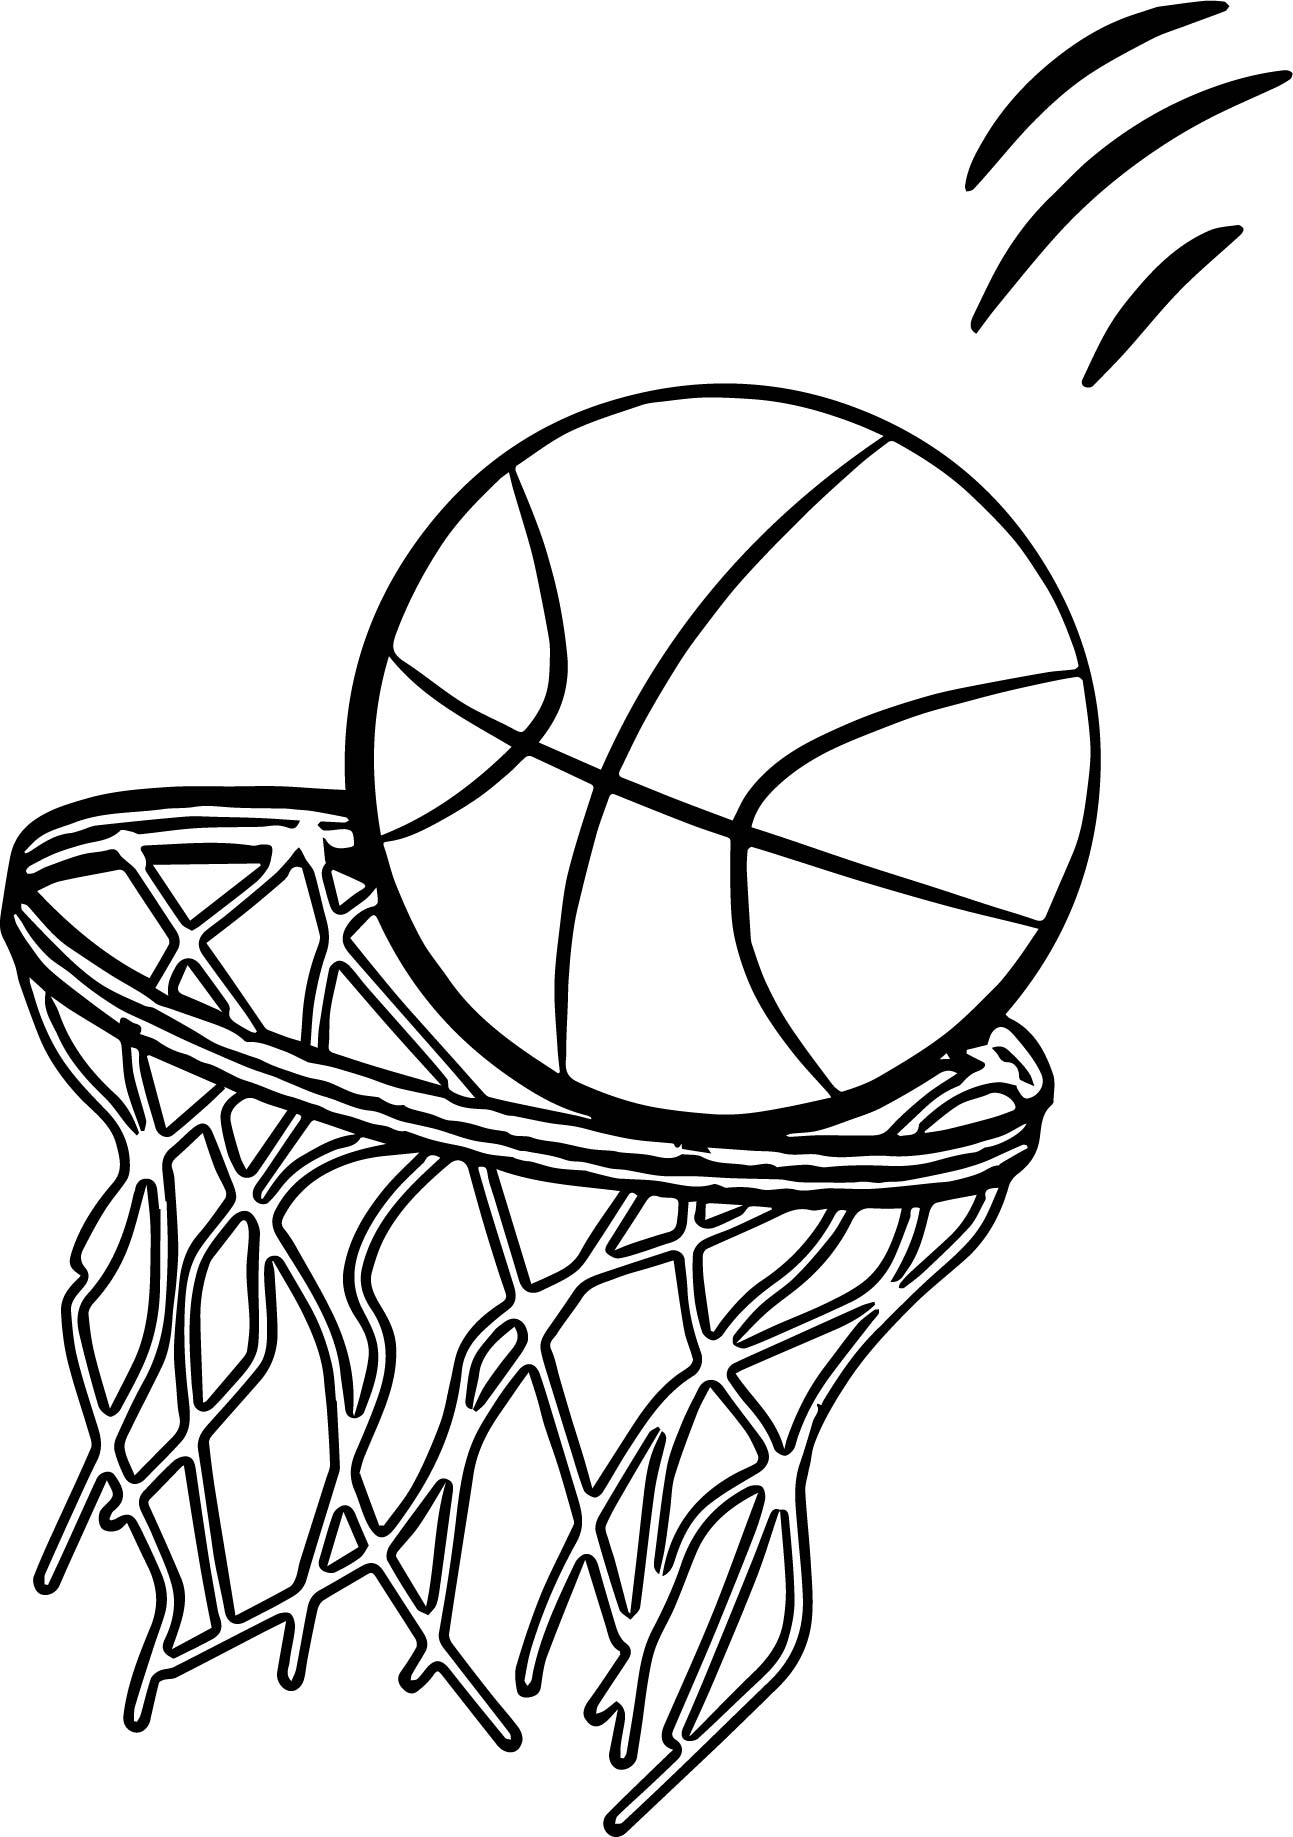 Basketball Goal Coloring Pages at GetColorings.com | Free printable ...